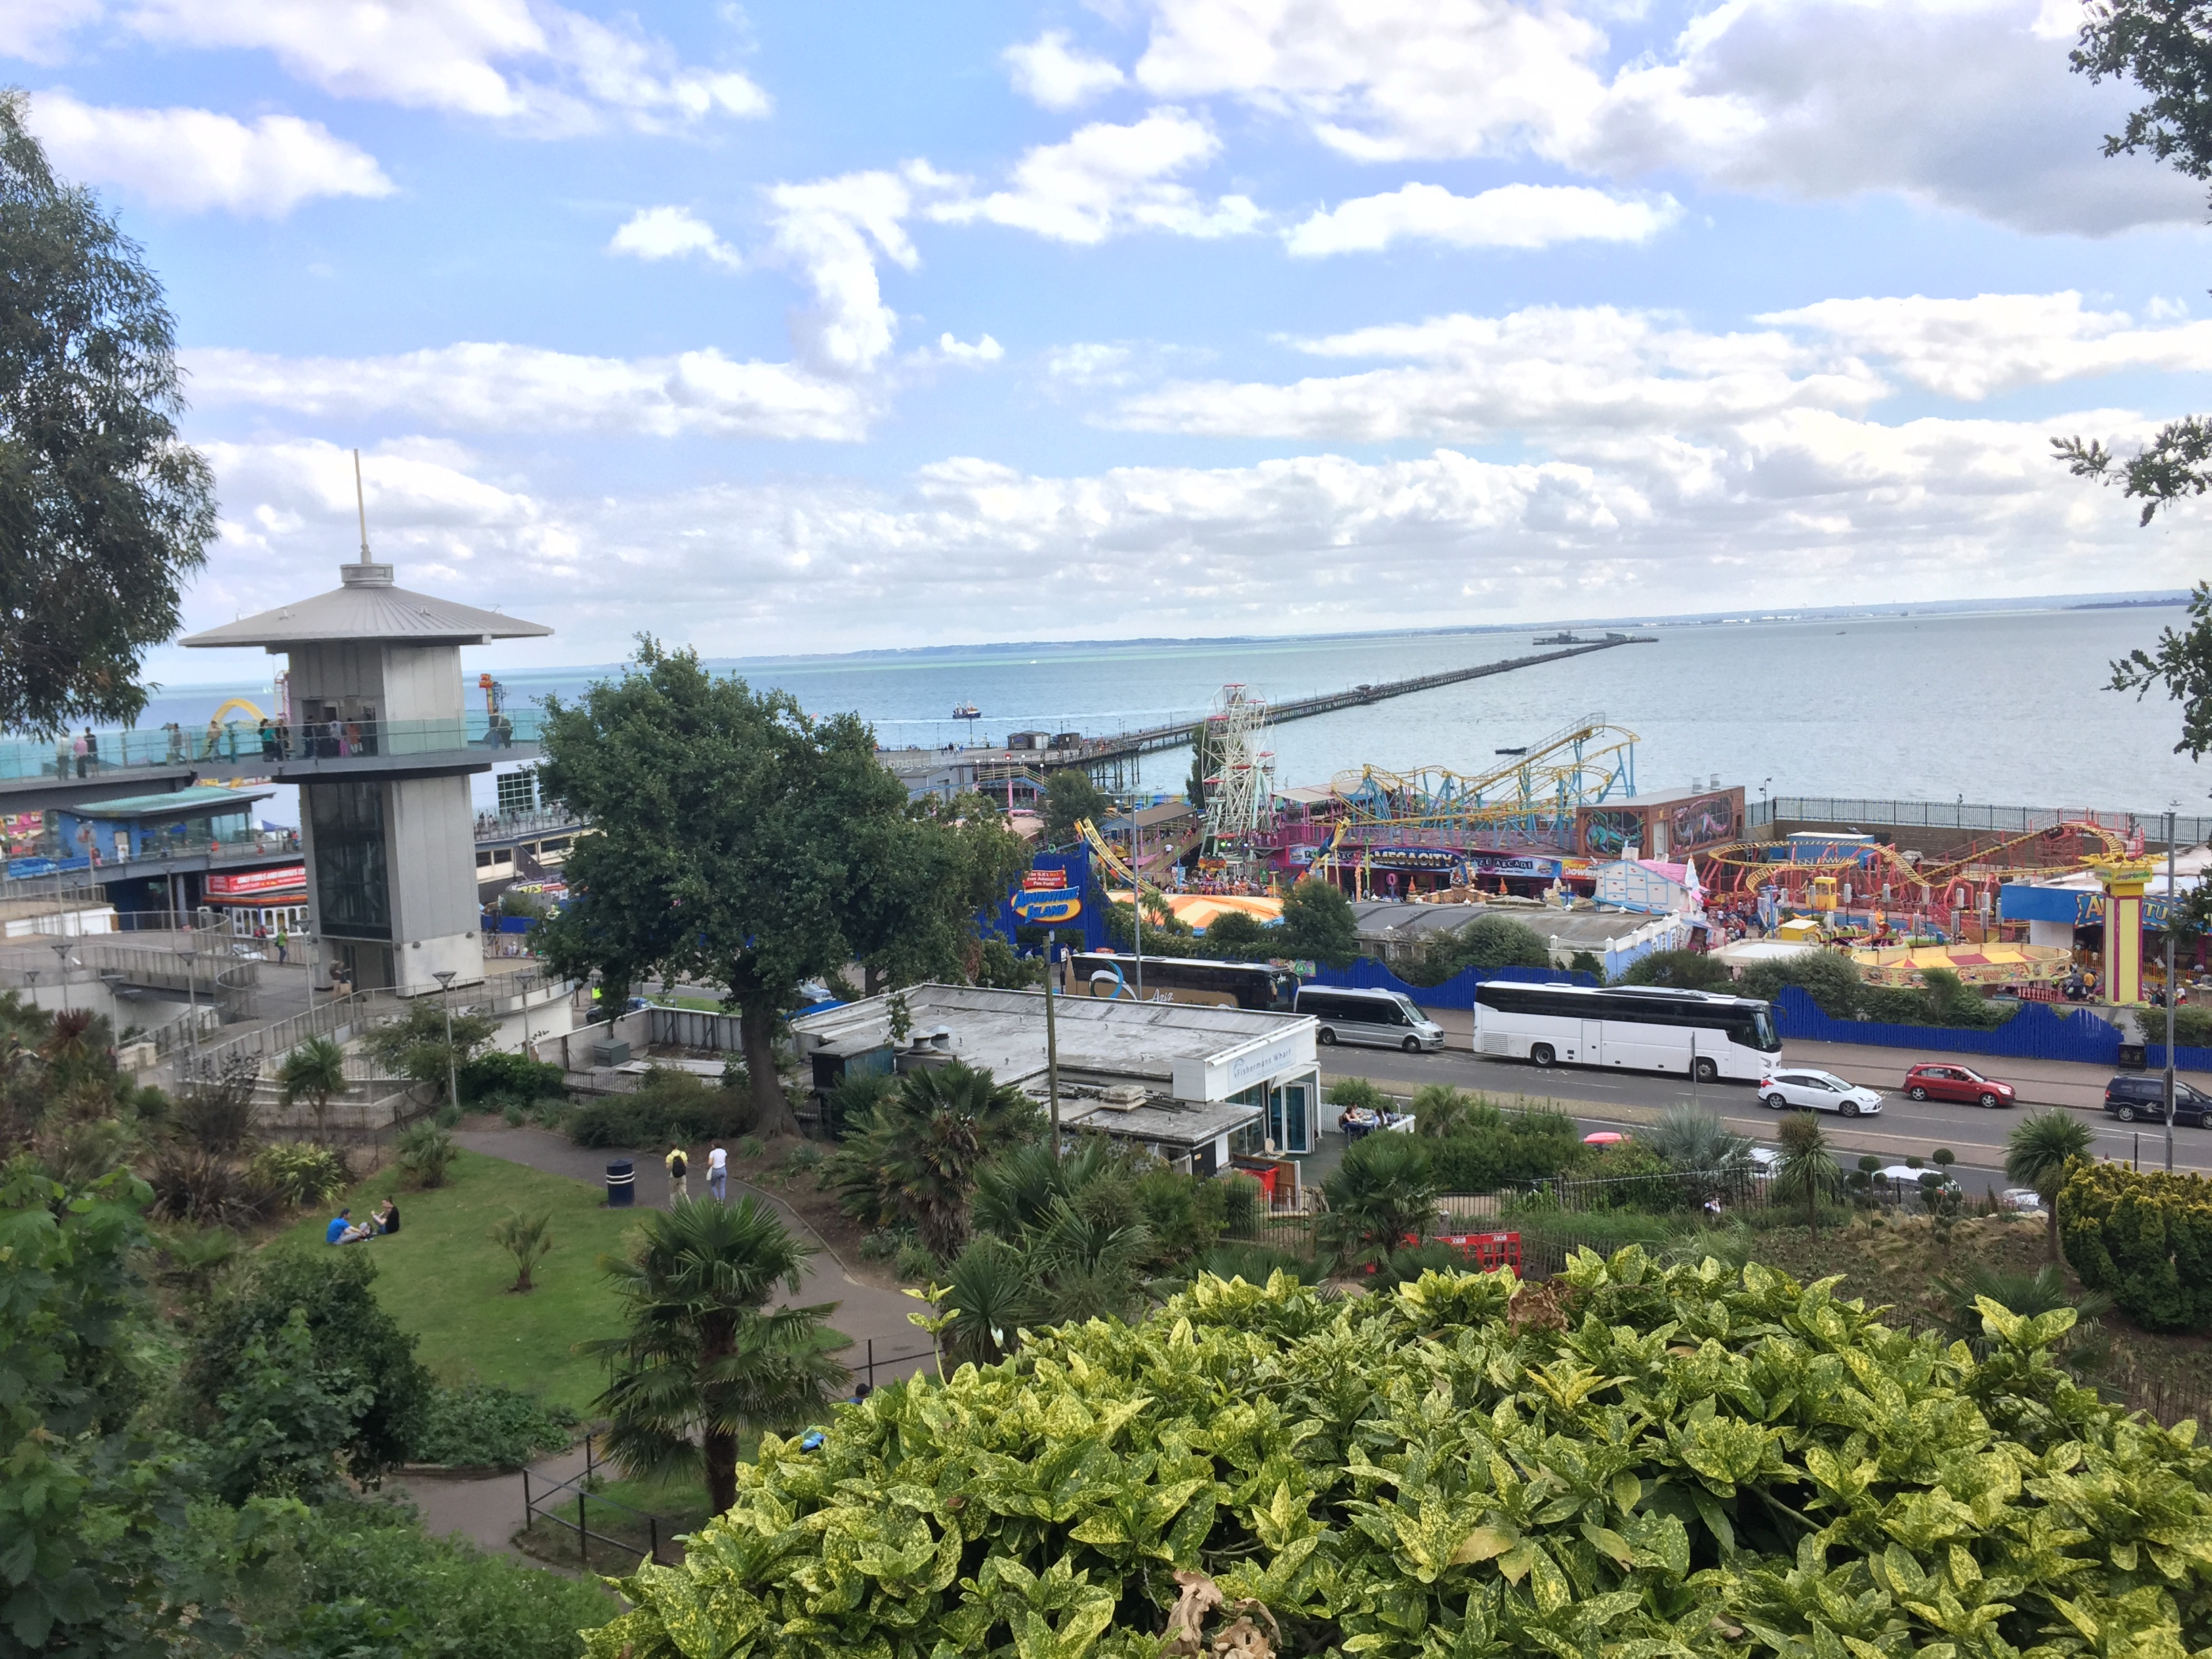 Southend Seafront, with the Adventure Island theme park and the very long pier stretching into the distance, viewed from up on the cliffs.